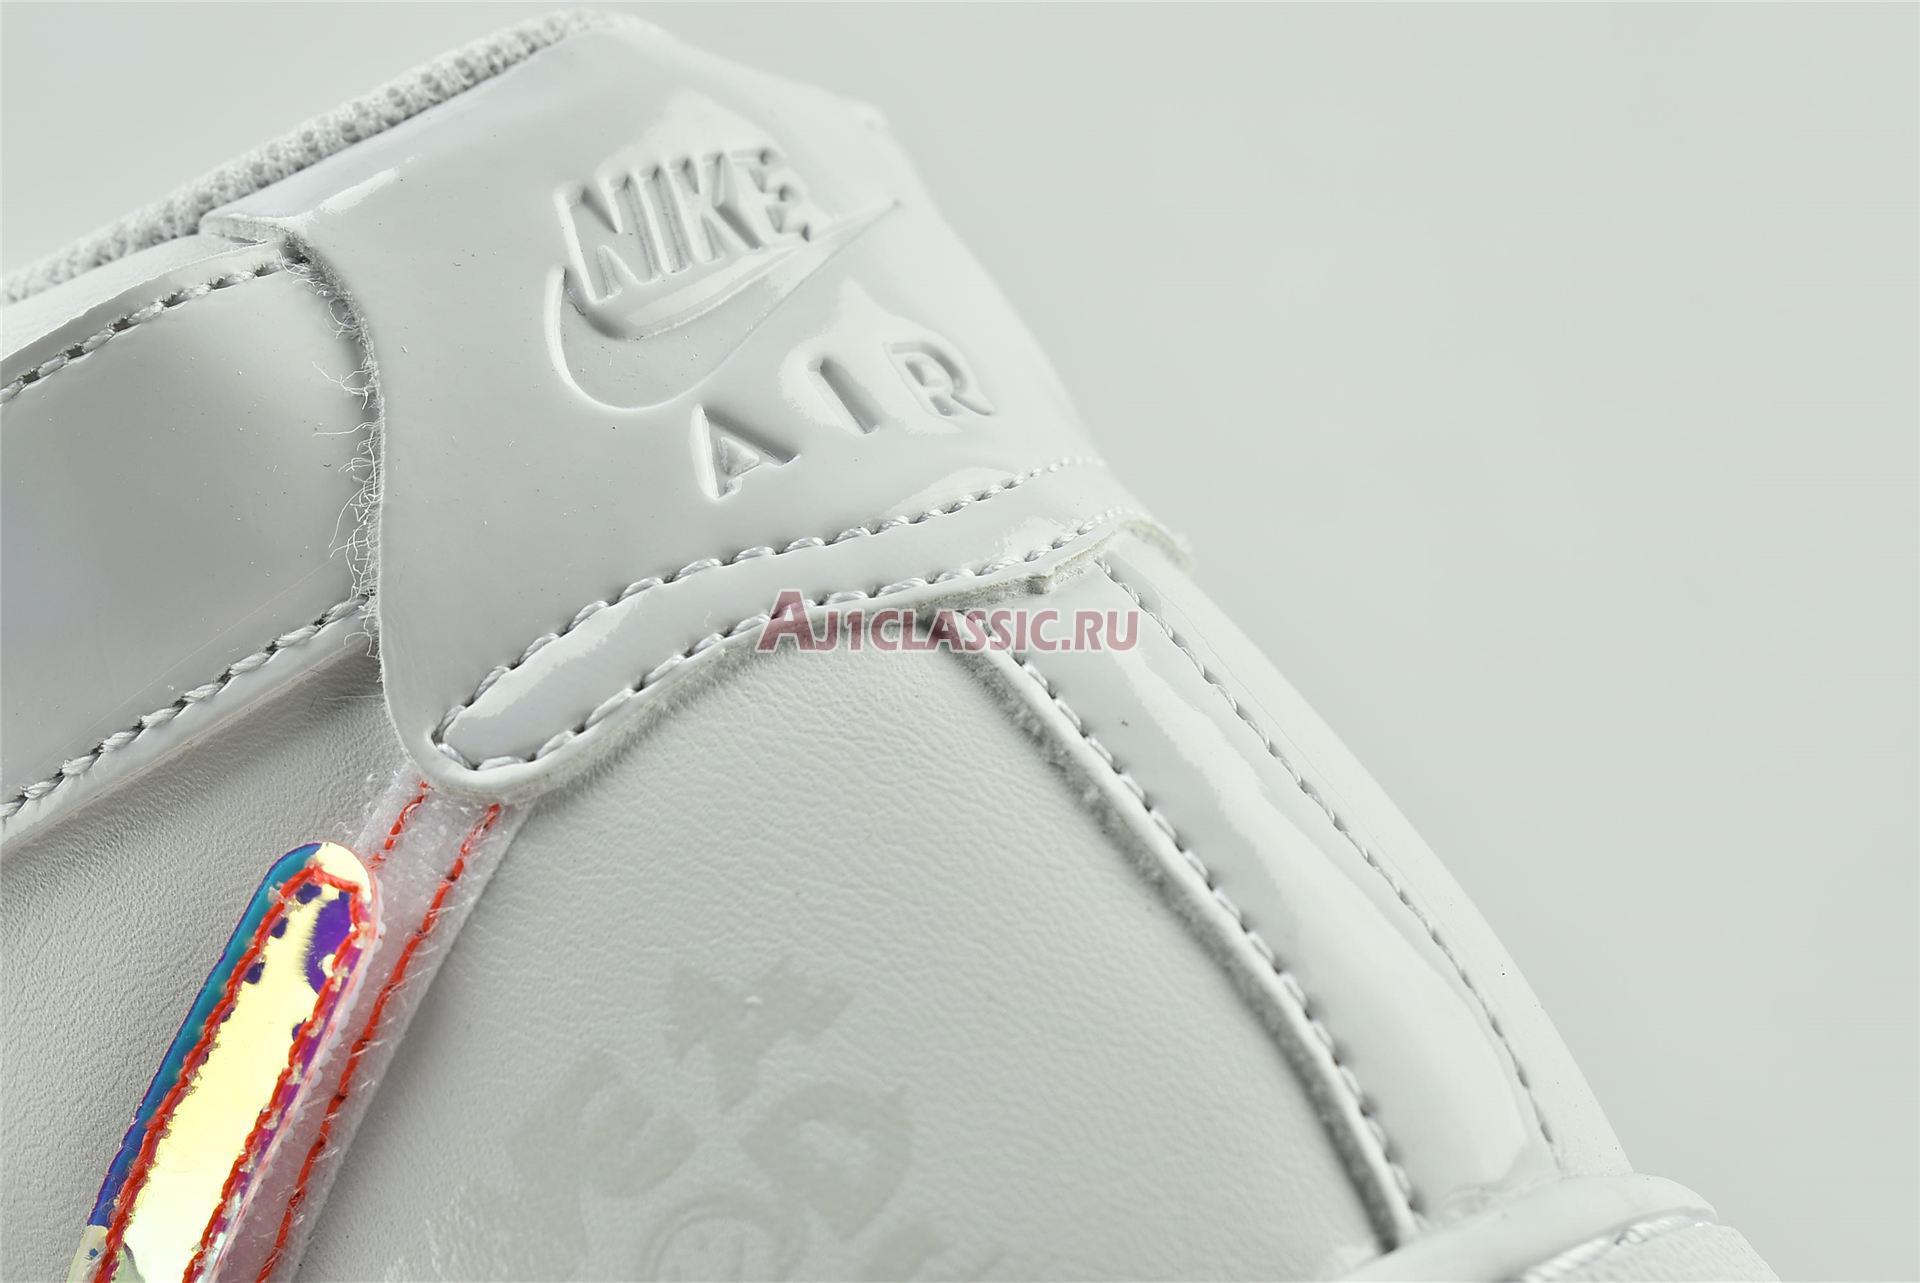 Nike Wmns Air Force 1 High LX "Have A Good Game" DC2111-191